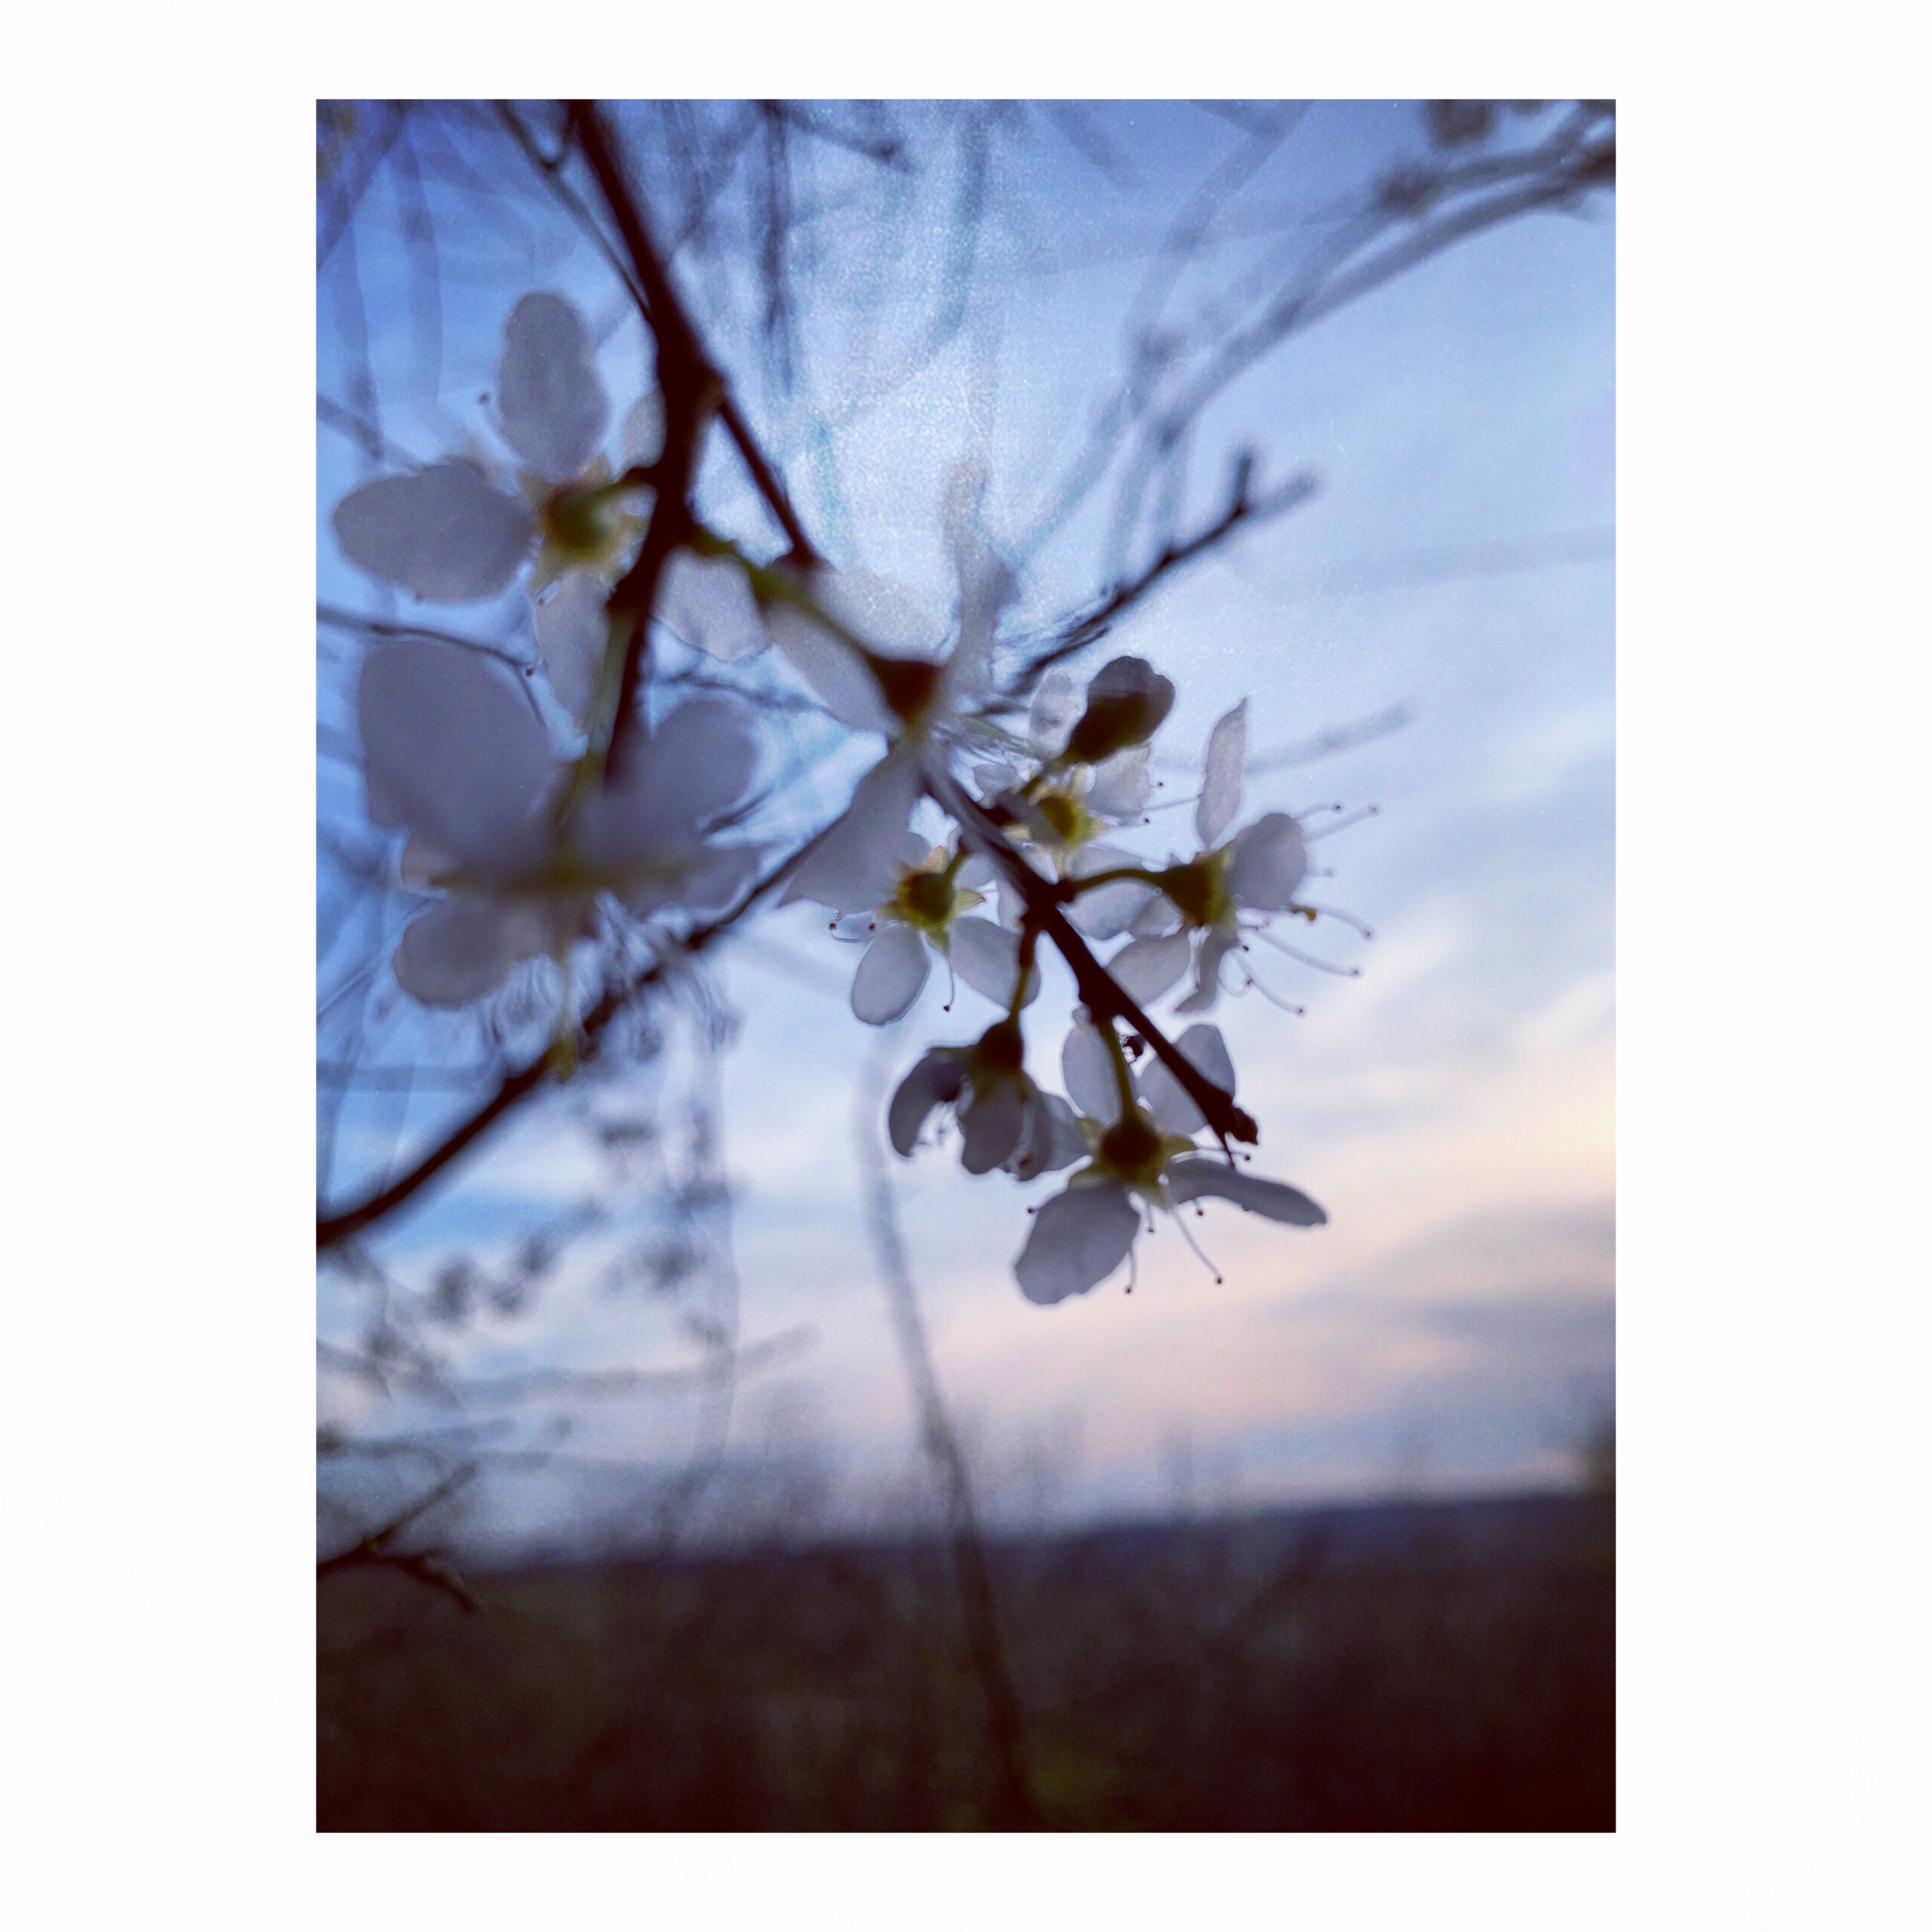 Image : A photograph of spring blossom, set against a pink tinged sky. An almost ghostly trace can be seen in the image.